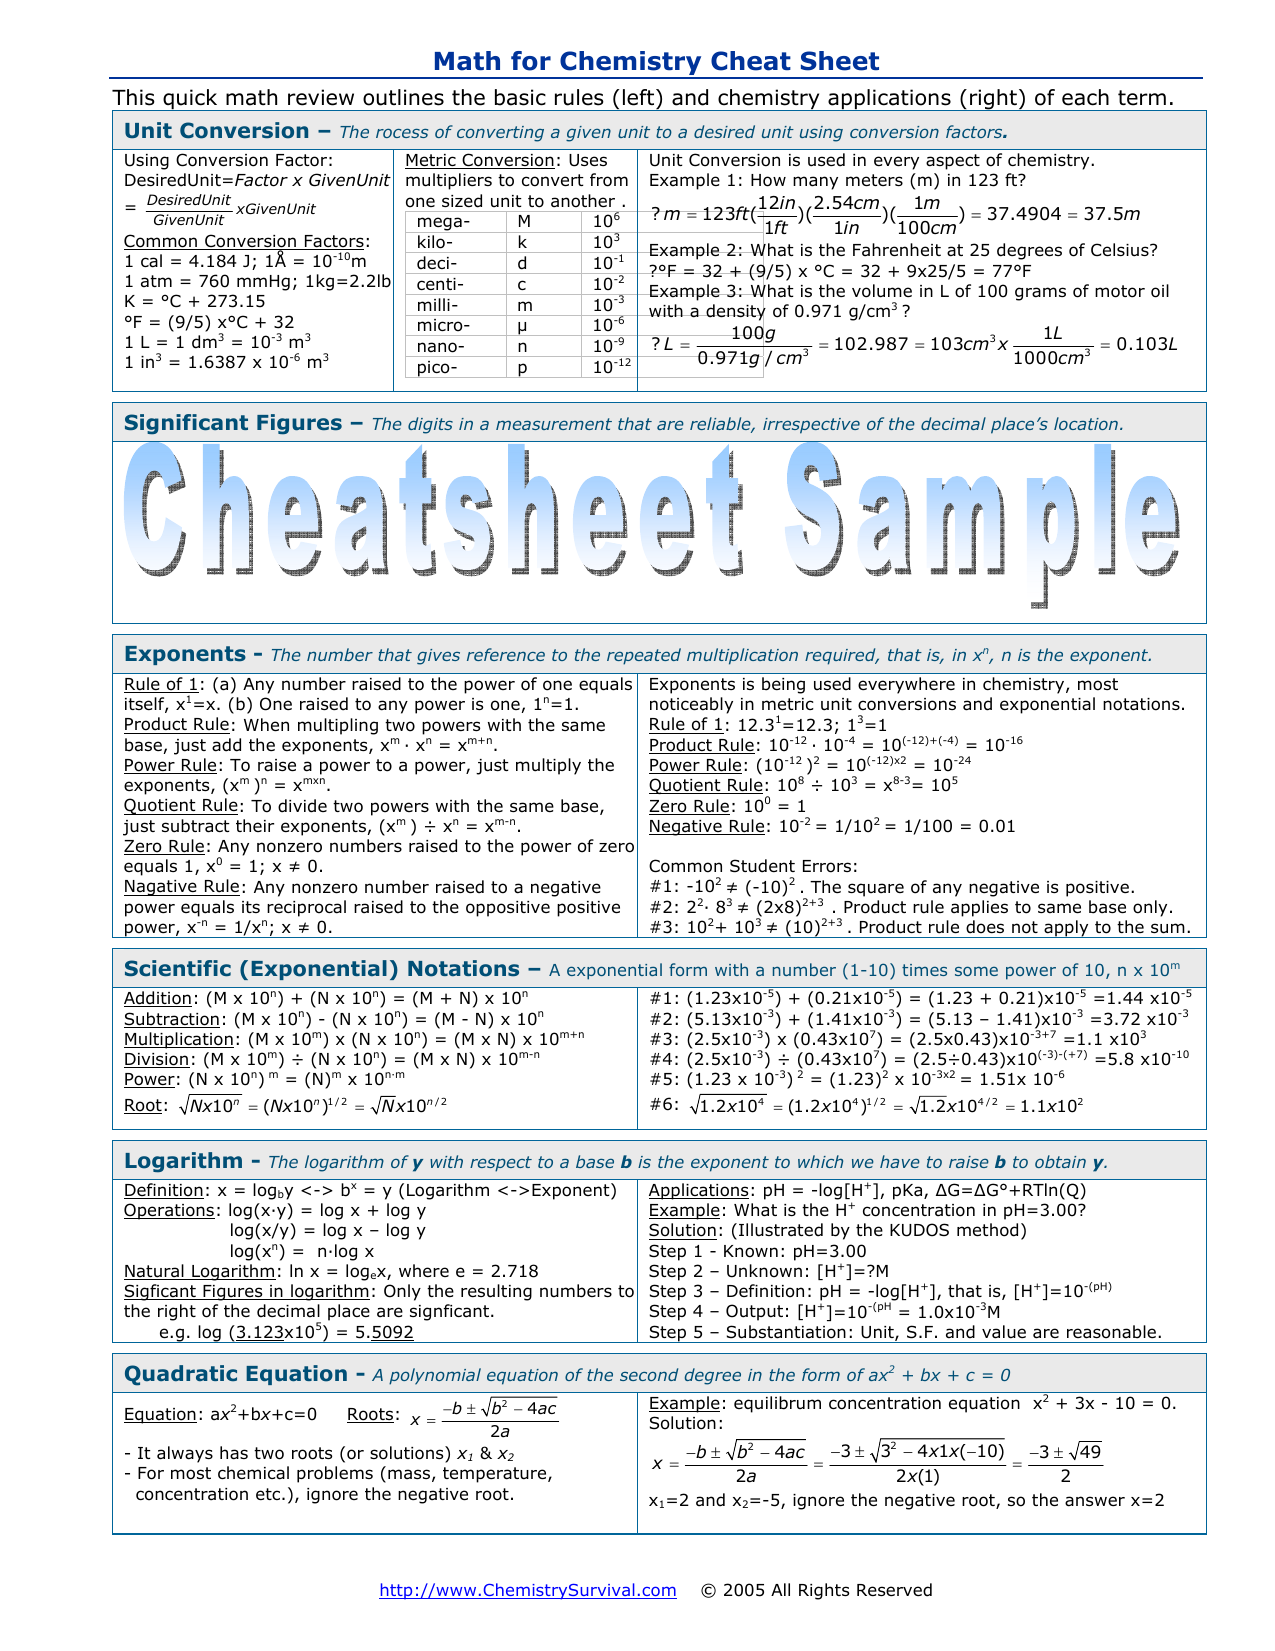 math-for-chemistry-cheat-sheet